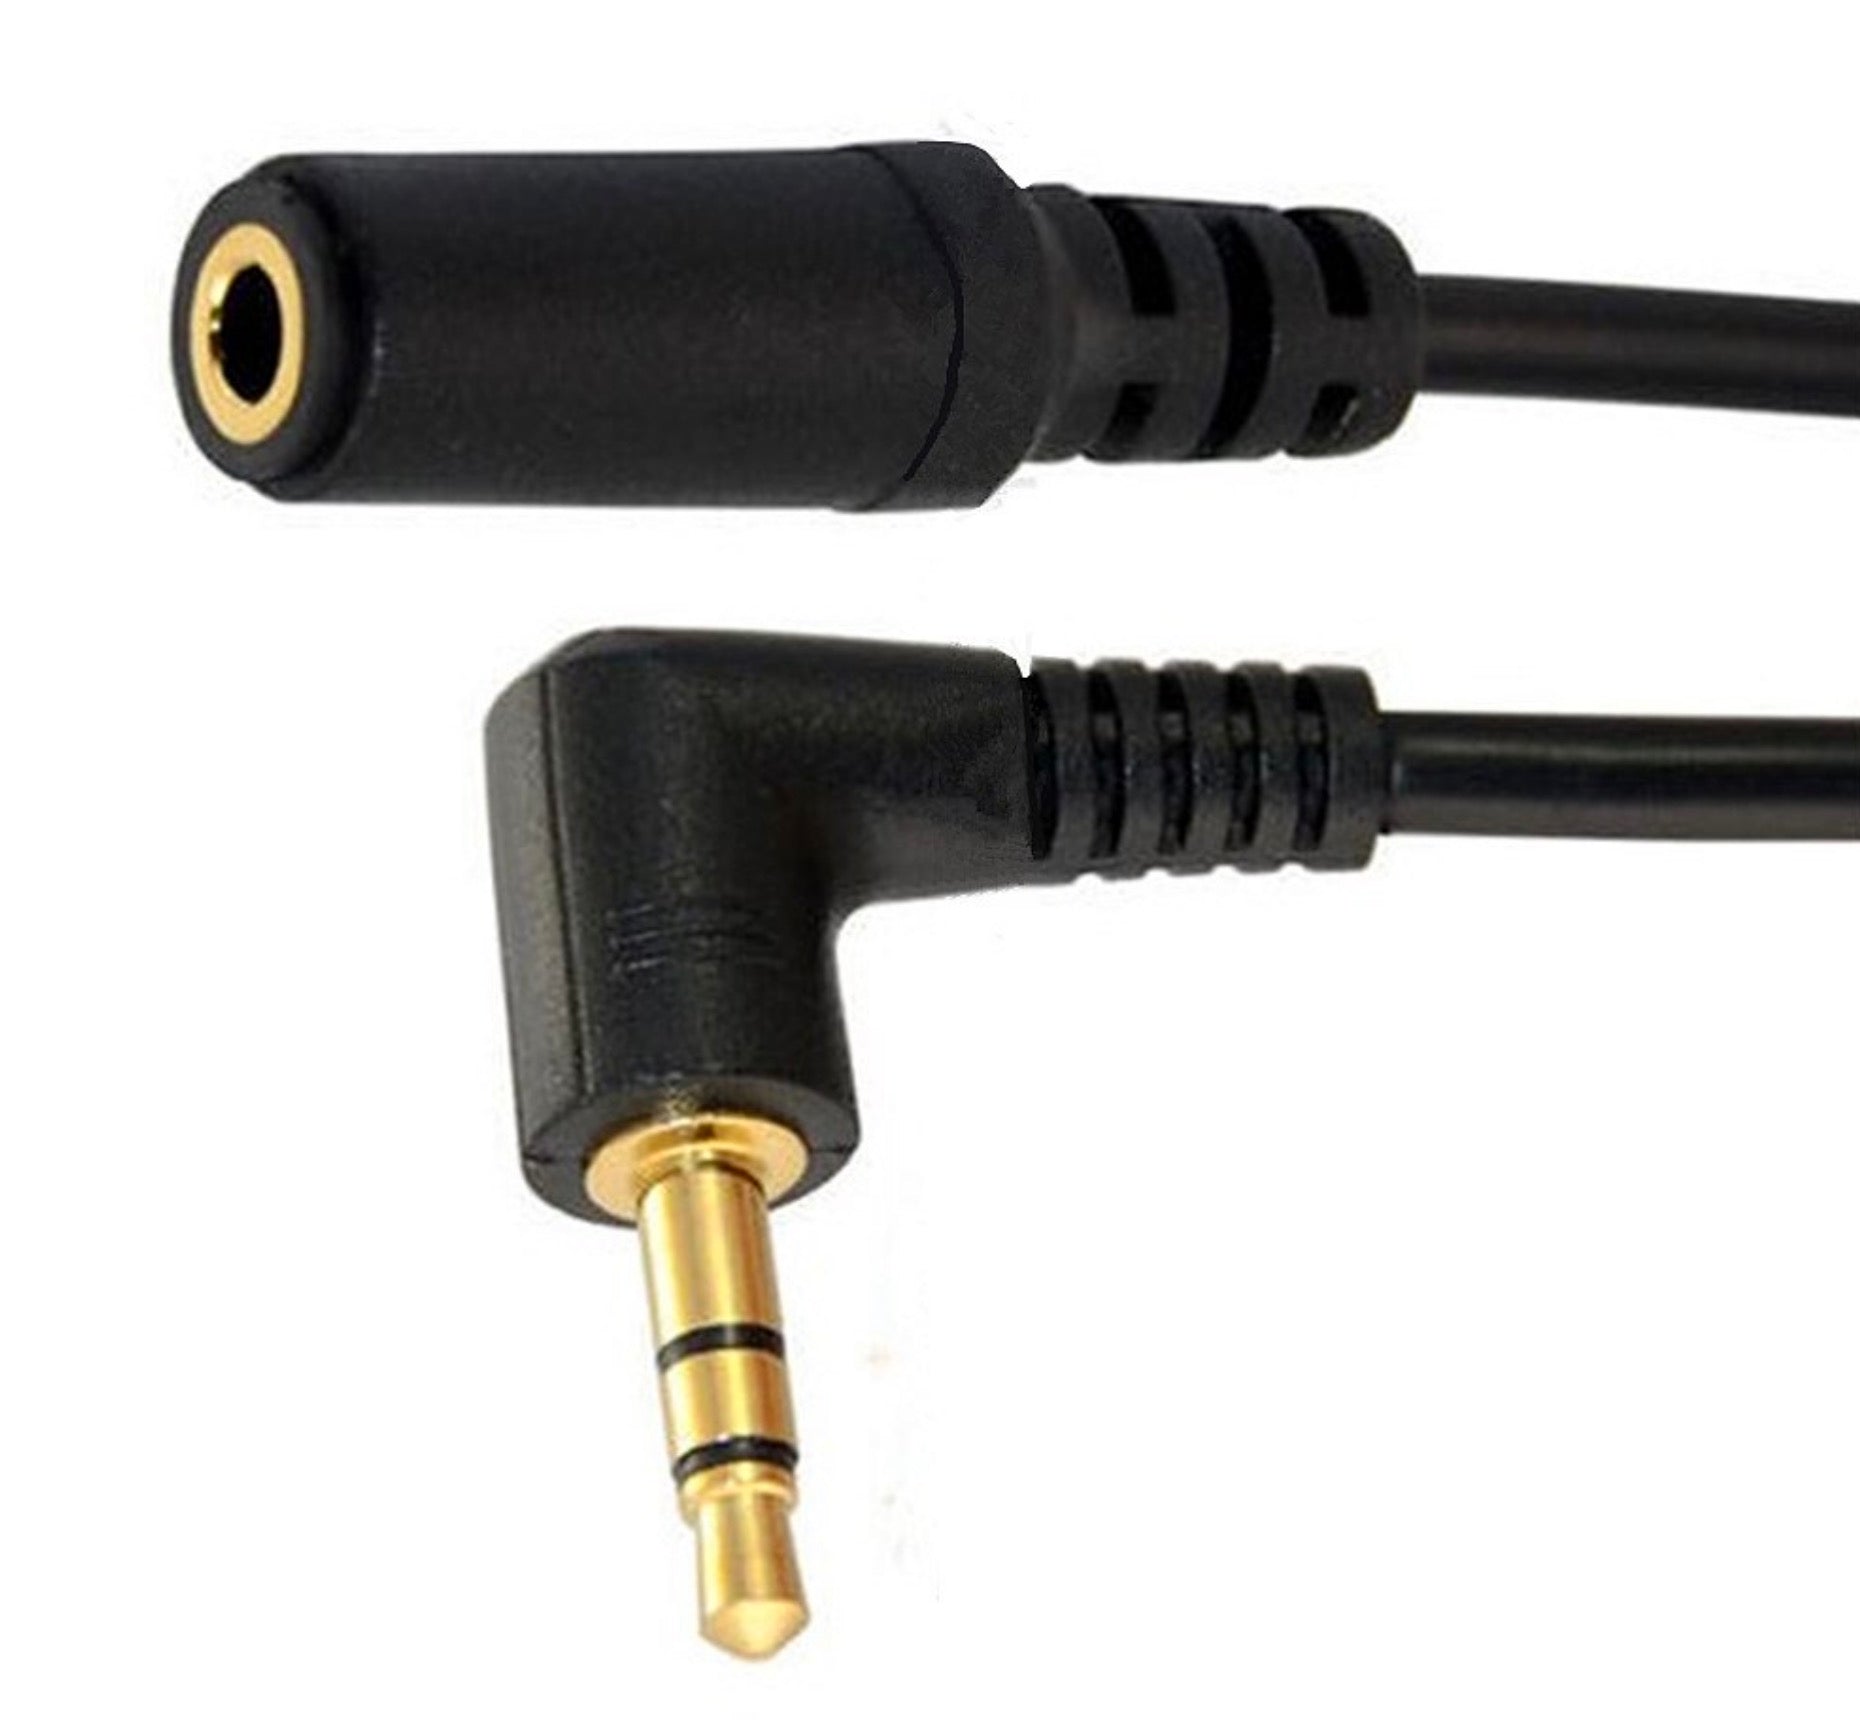 3.5mm 3 Pole Male to Female Stereo Audio Adapter Cable 0.2m